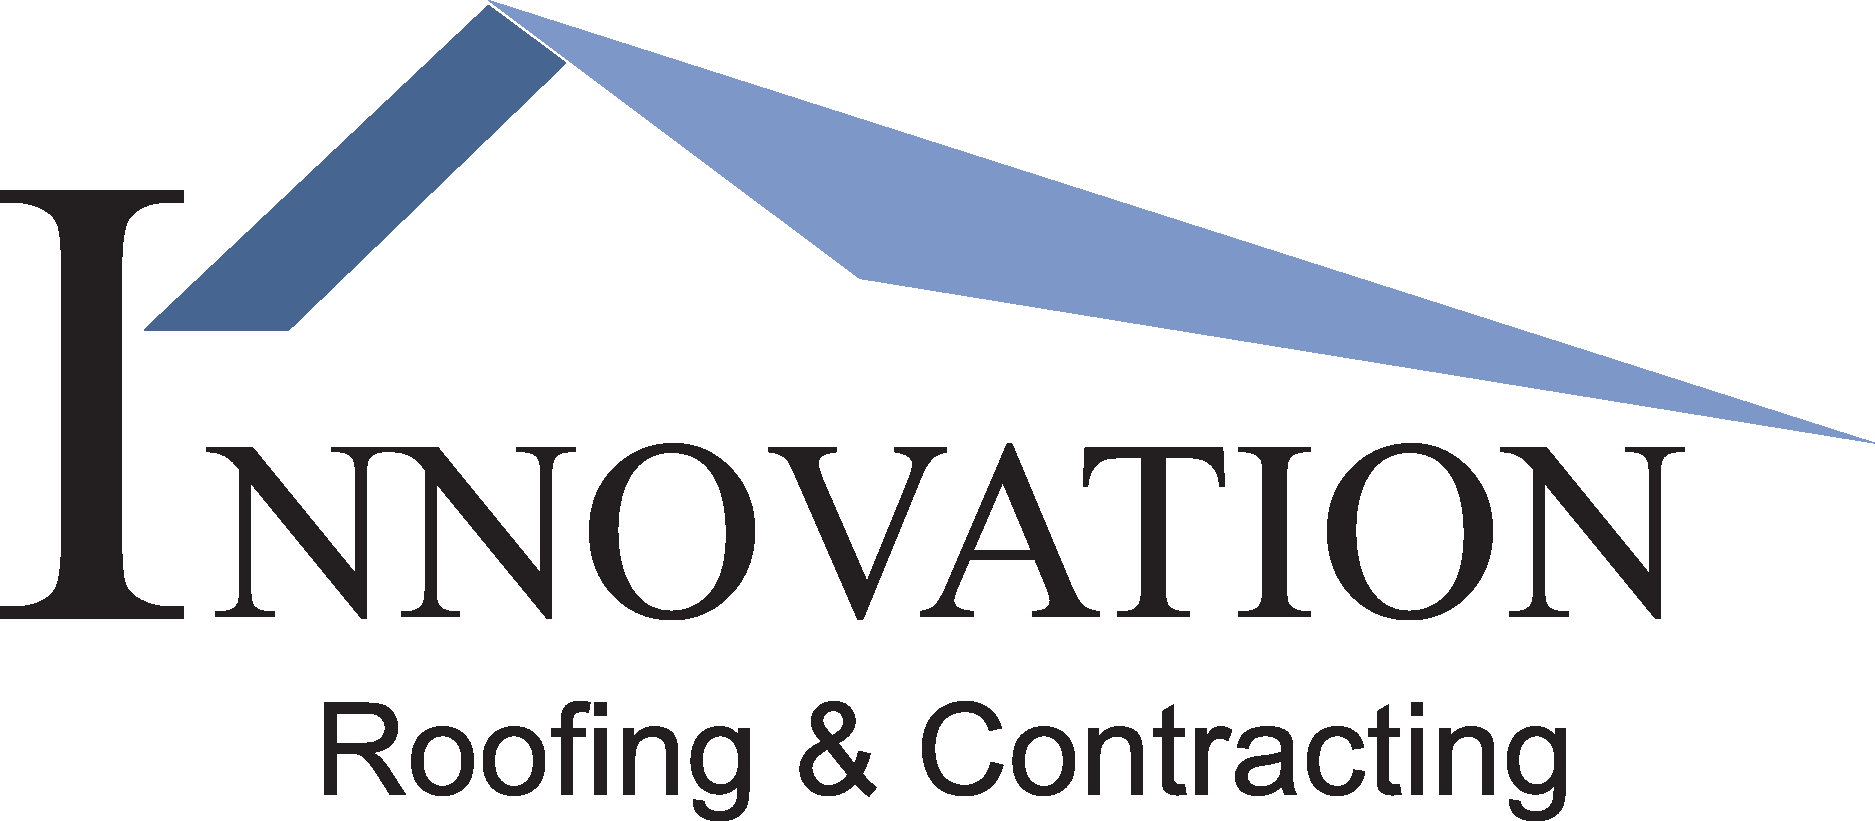 Innovation Roofing & Contracting Inc. Logo Vector